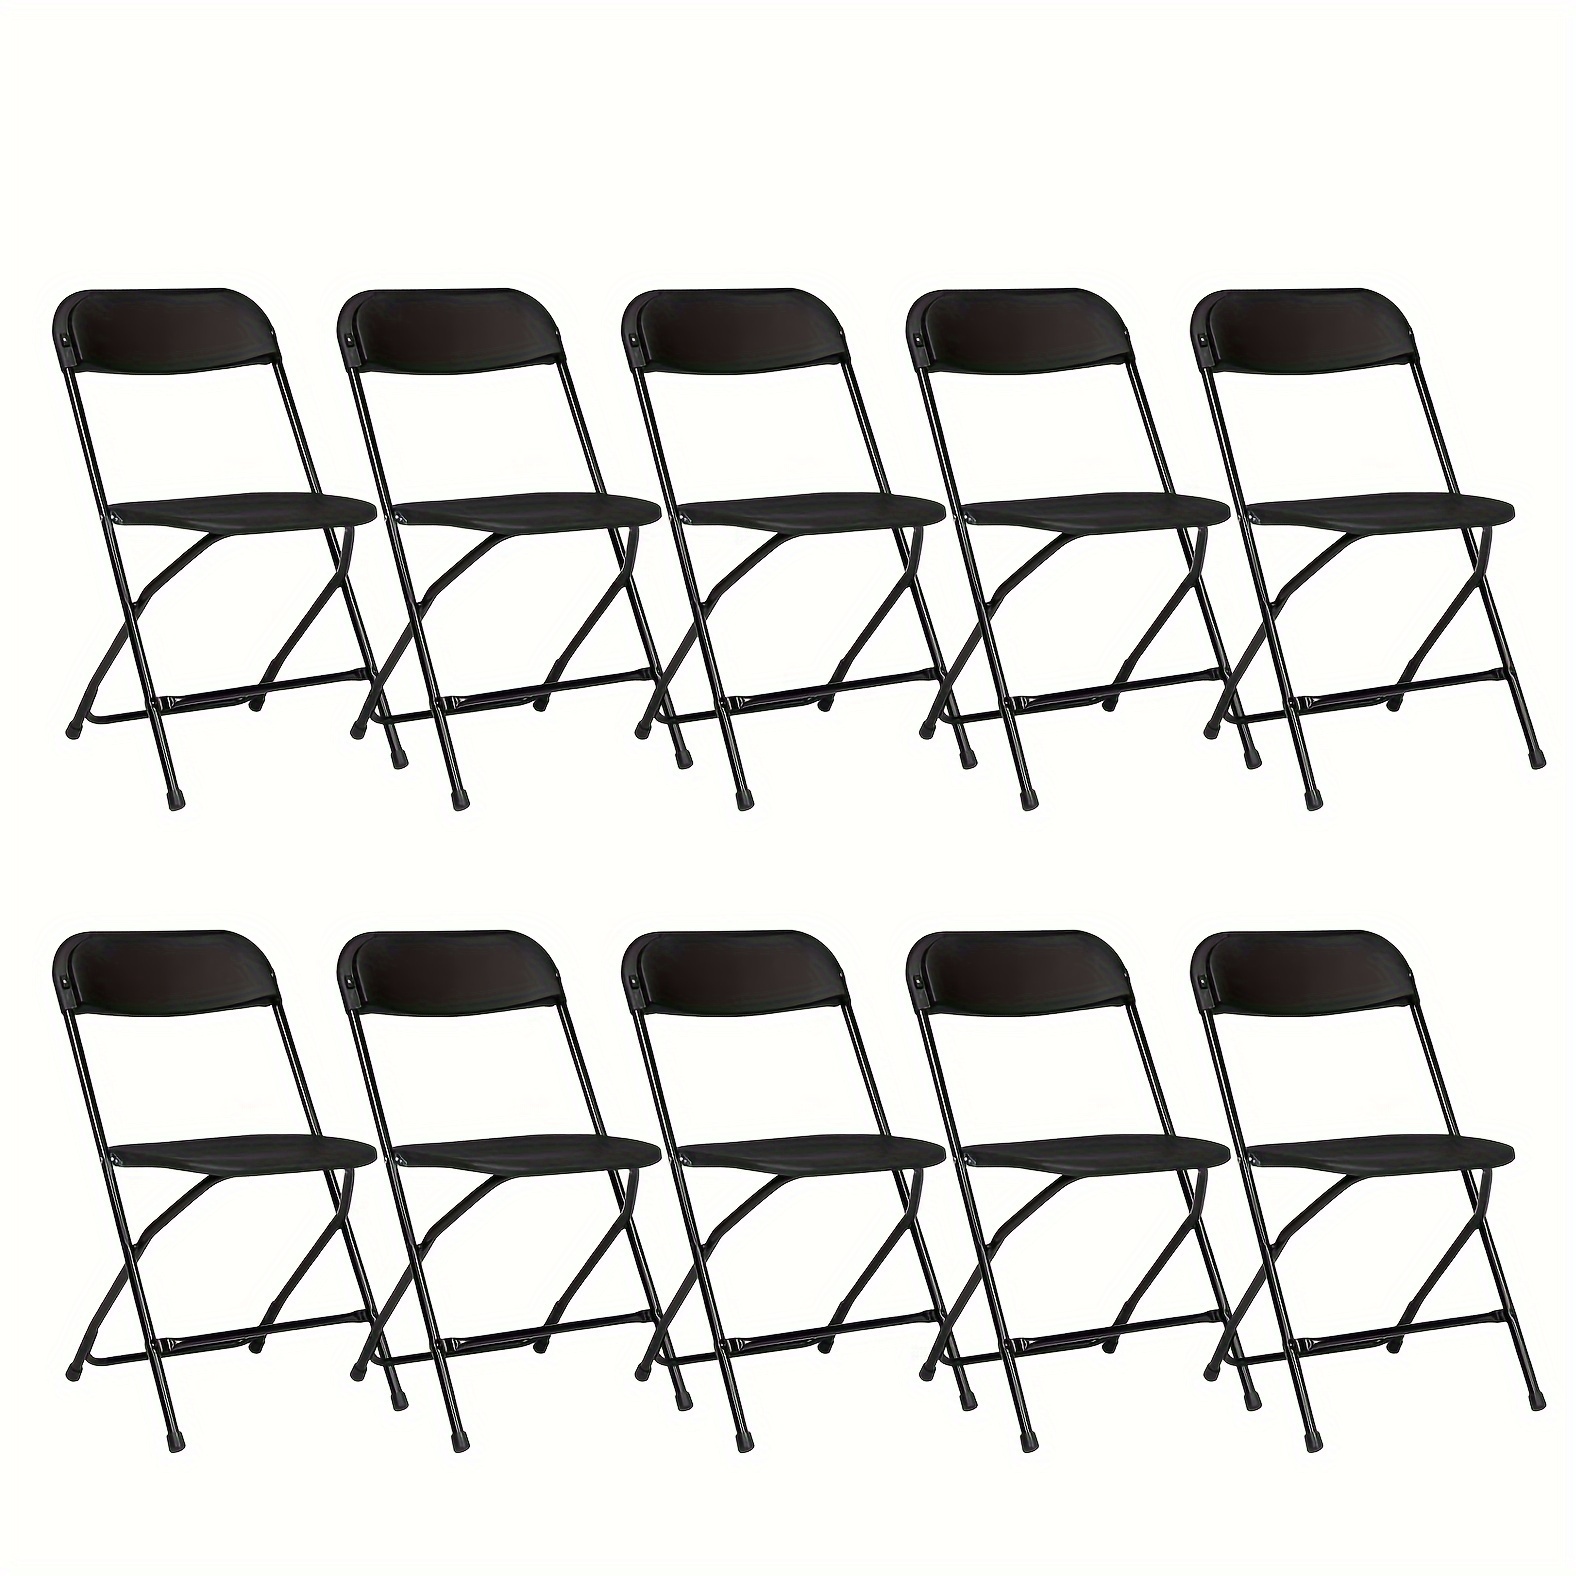 

Folding Chair, 10pcs Plastic Portable Foldable Chairs, Stackable Folding Chairs With Steel Frame 350lb Weight Limit For Home, Office, Wedding, Dining, Party, Indoor Outdoor Events, Black